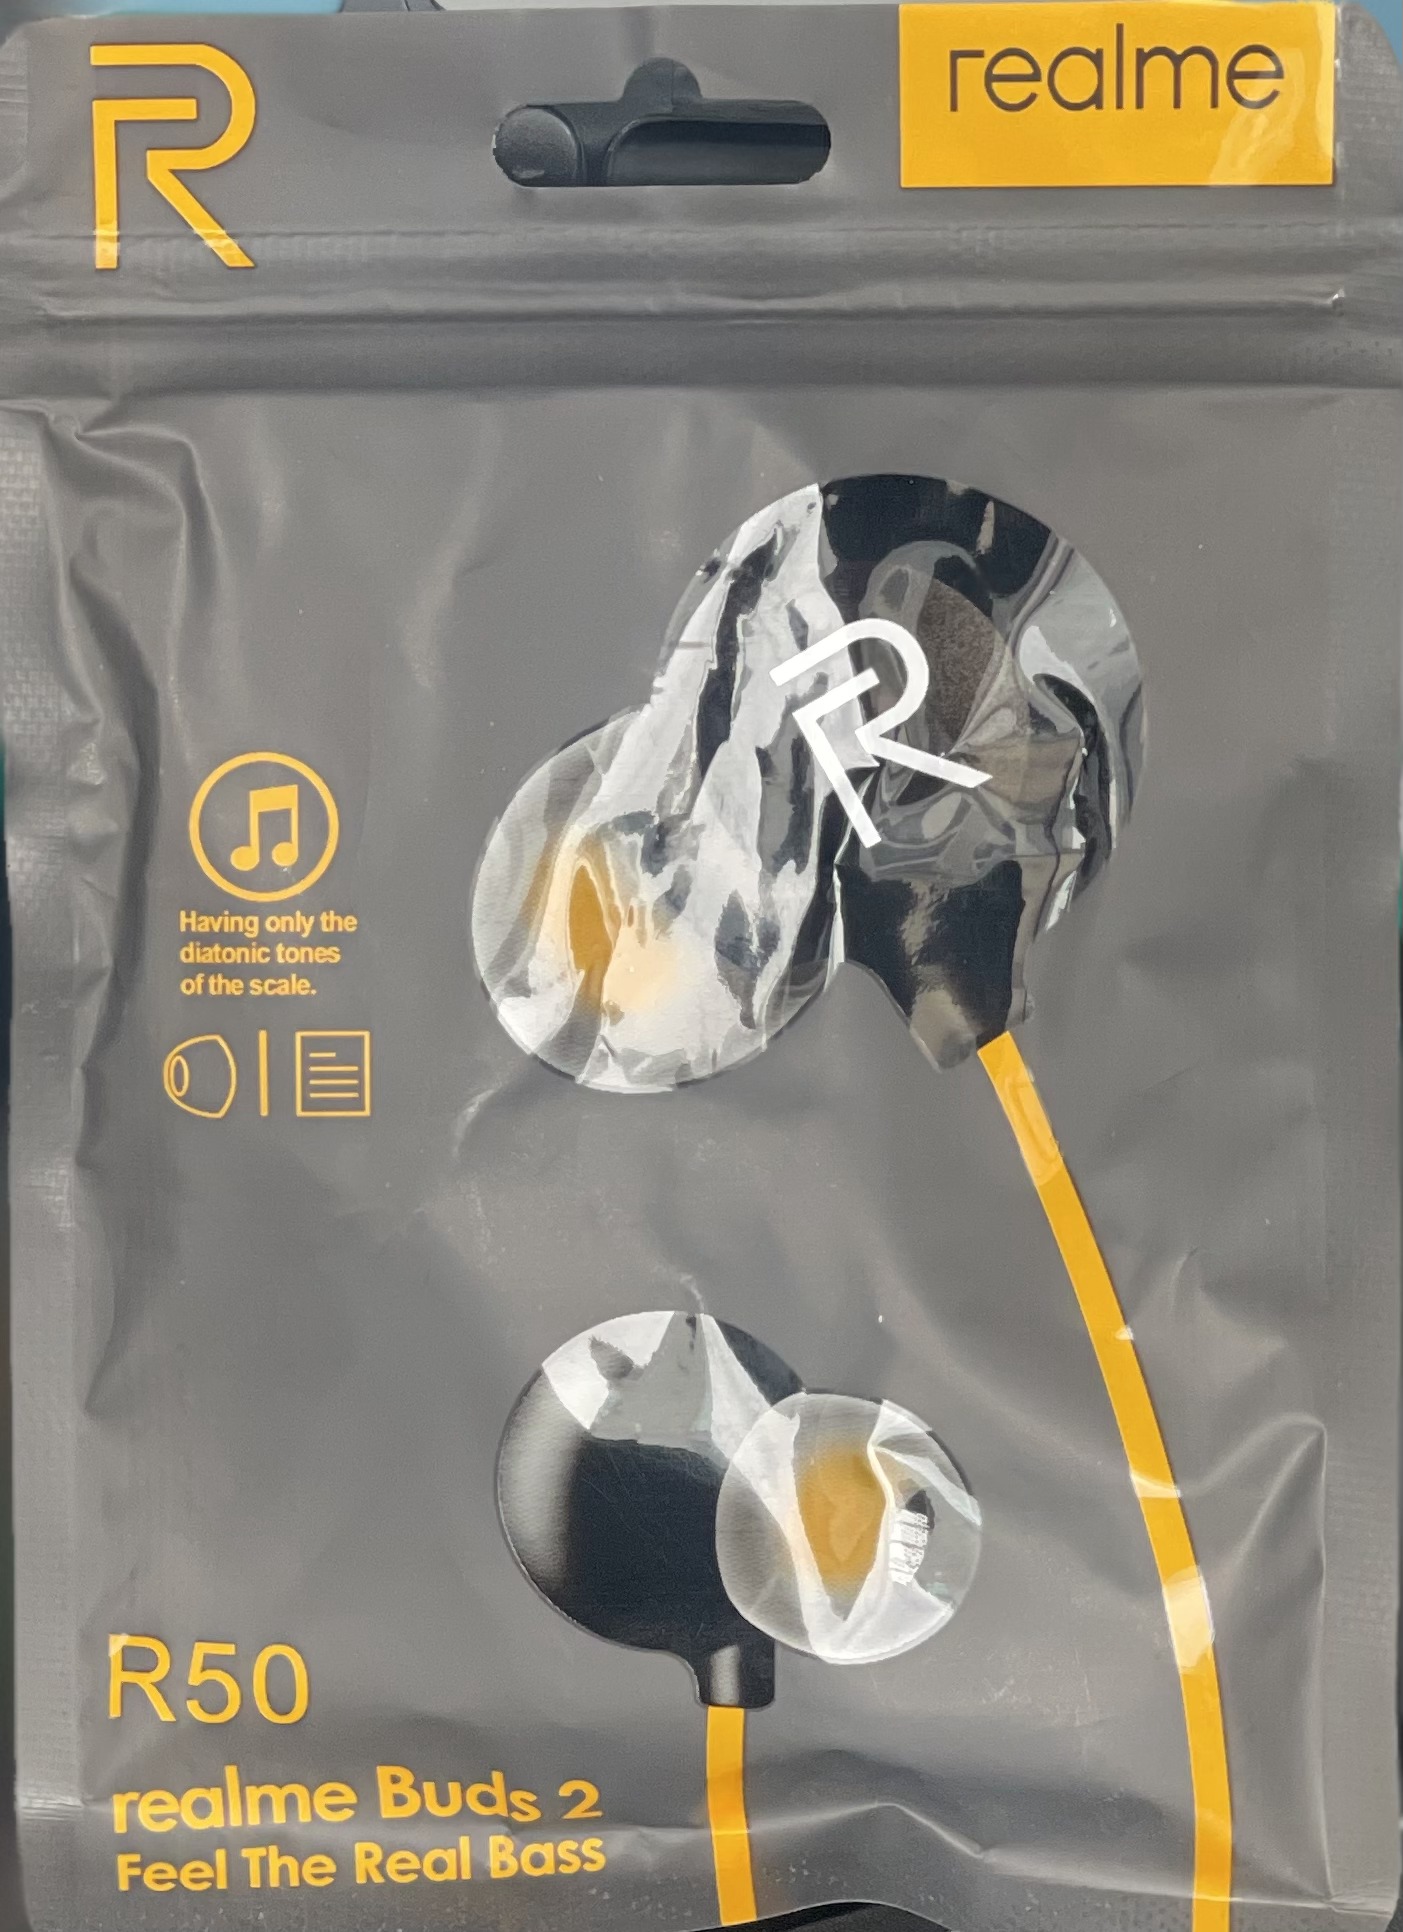 Realme R50 Wired Earphone